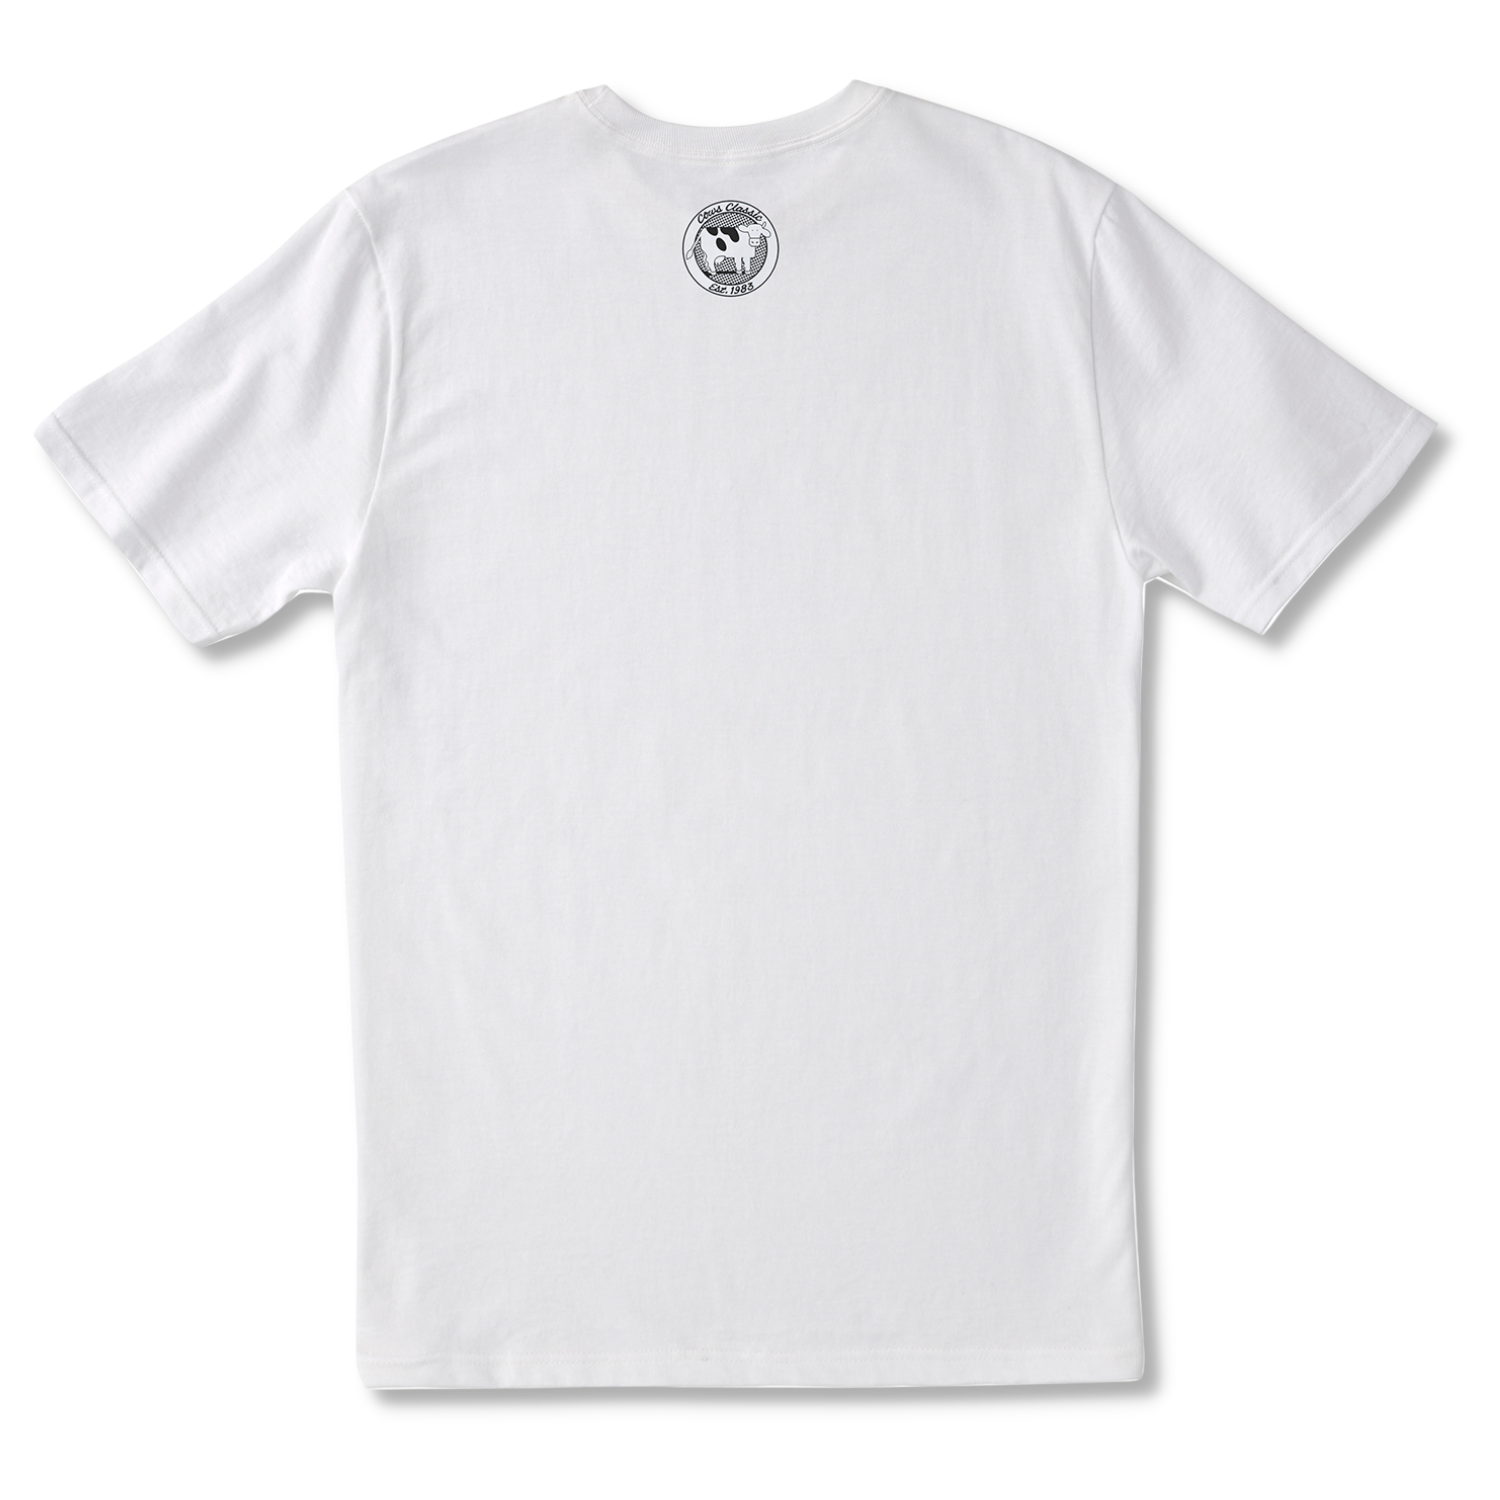 Wine COWS Classic Adult T